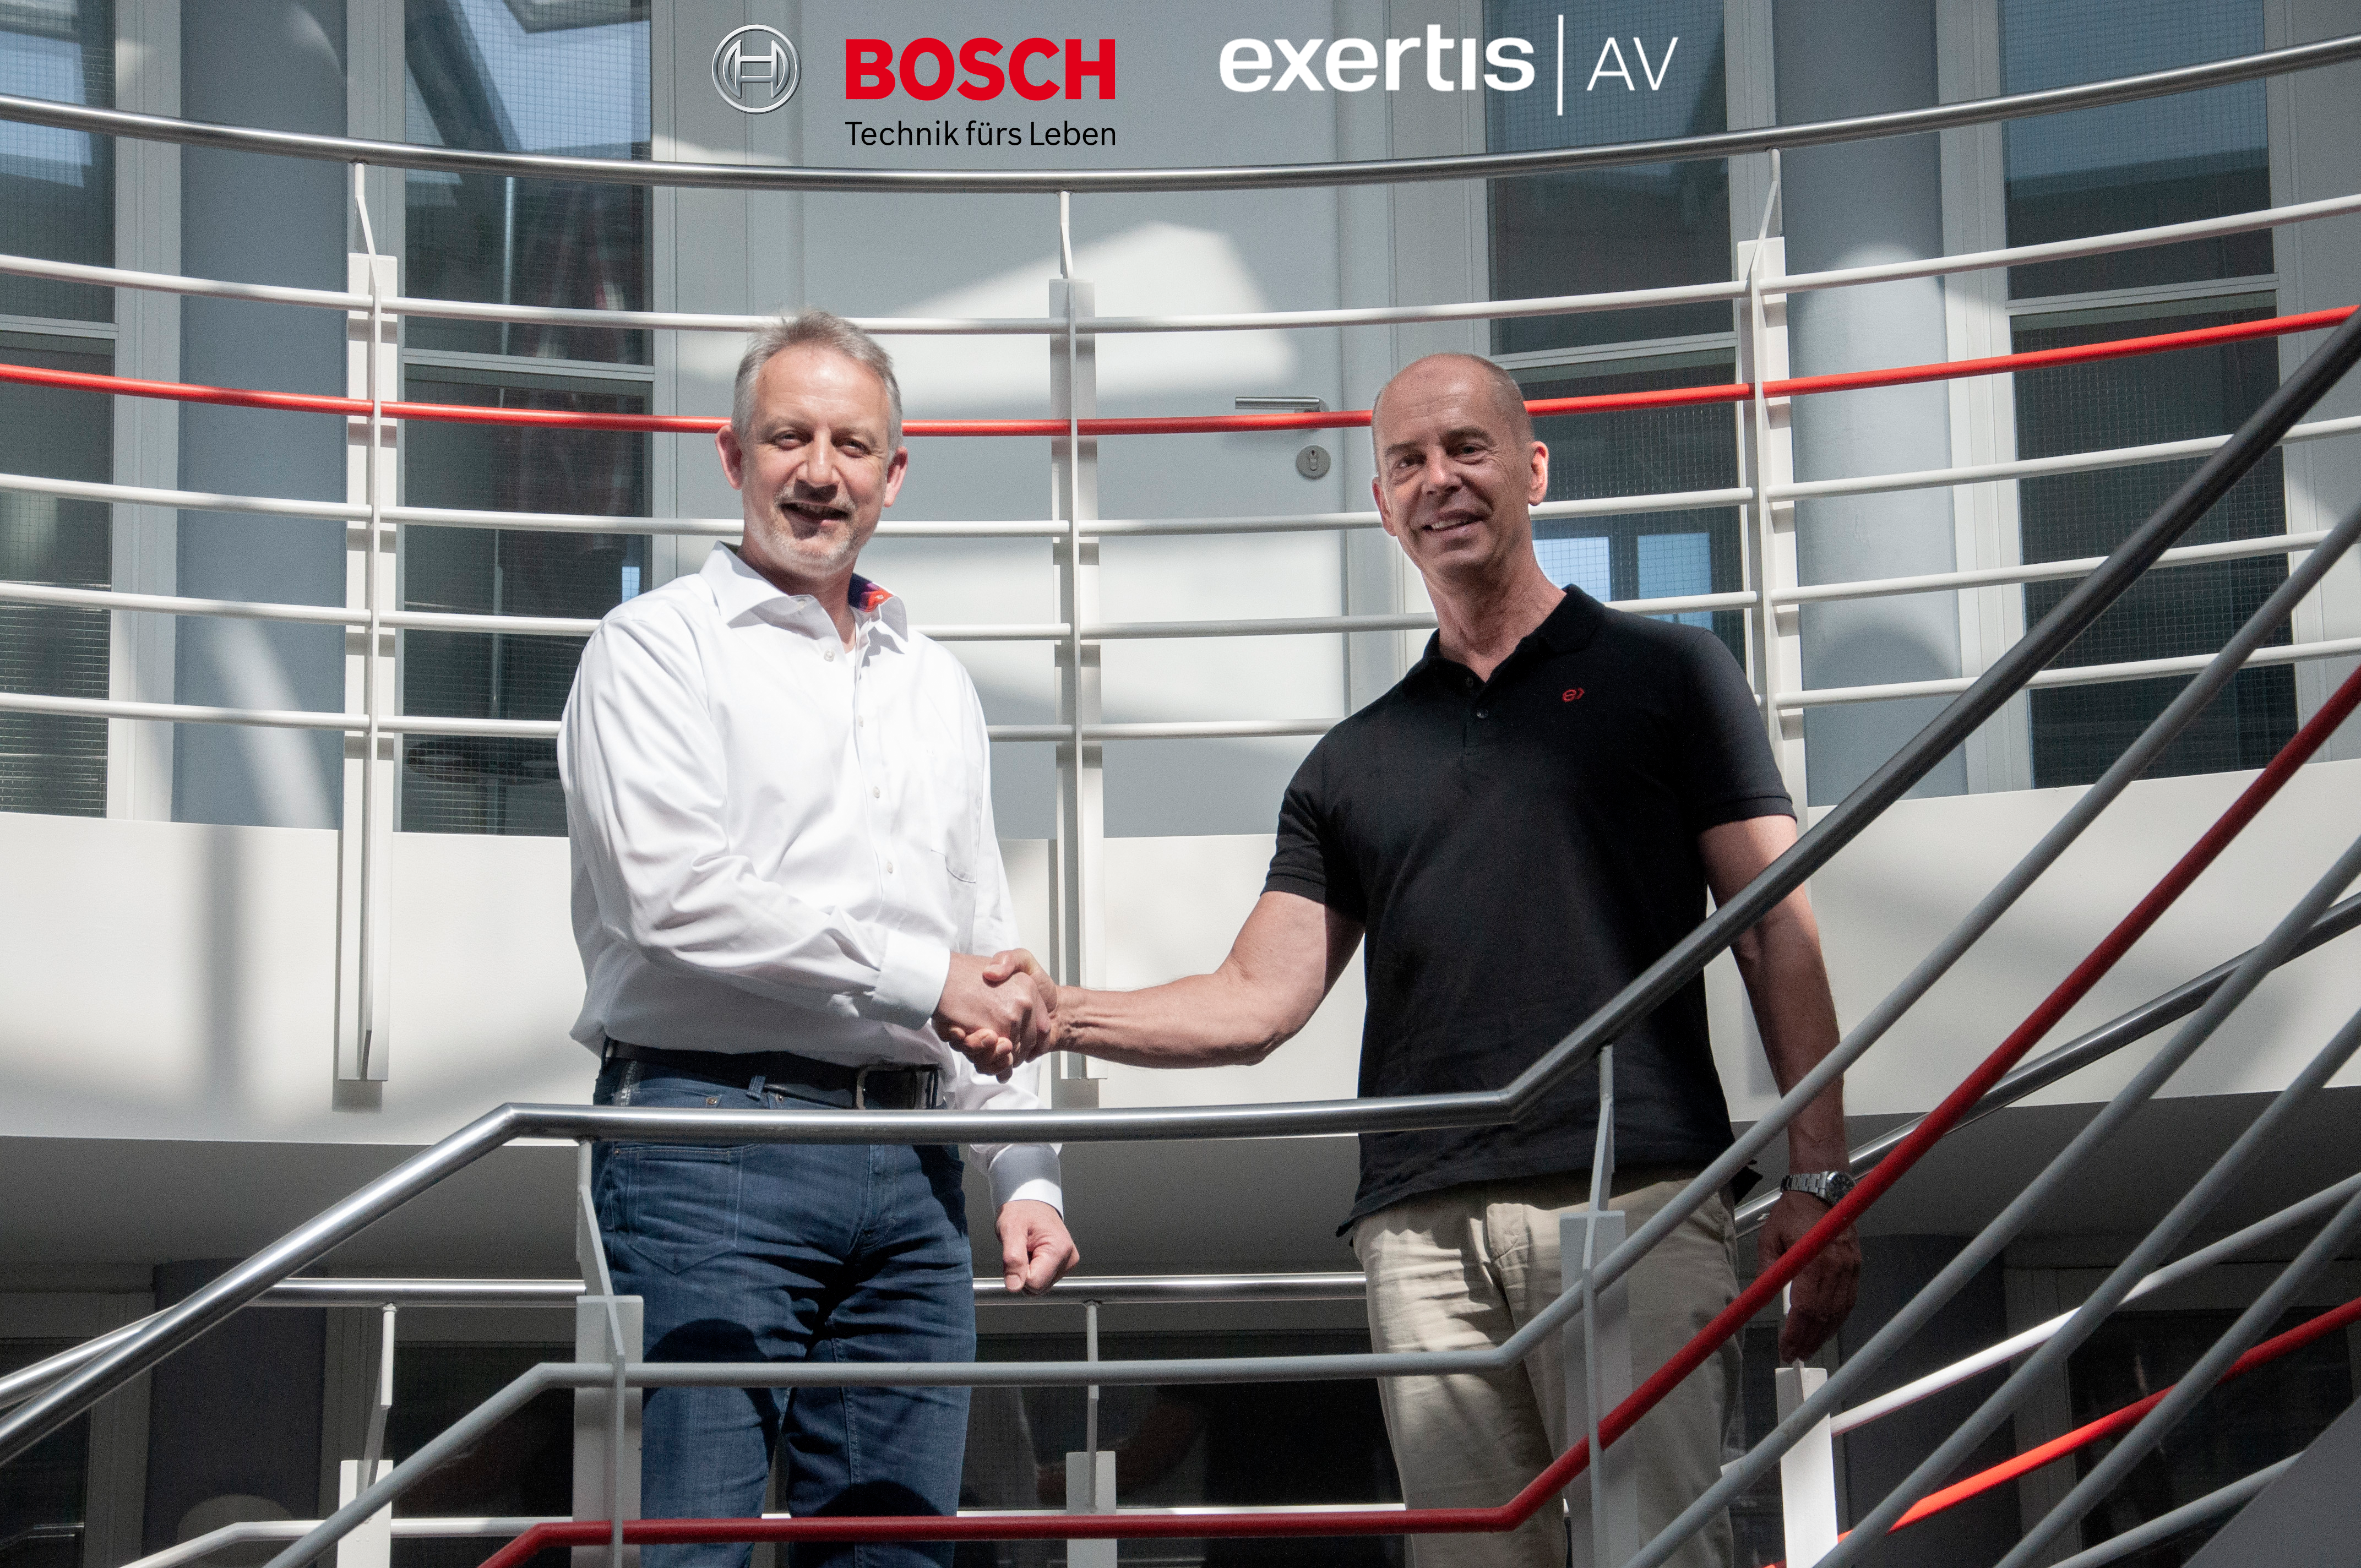 Exertis AV becomes new distributor for Bosch conference systems in Germany